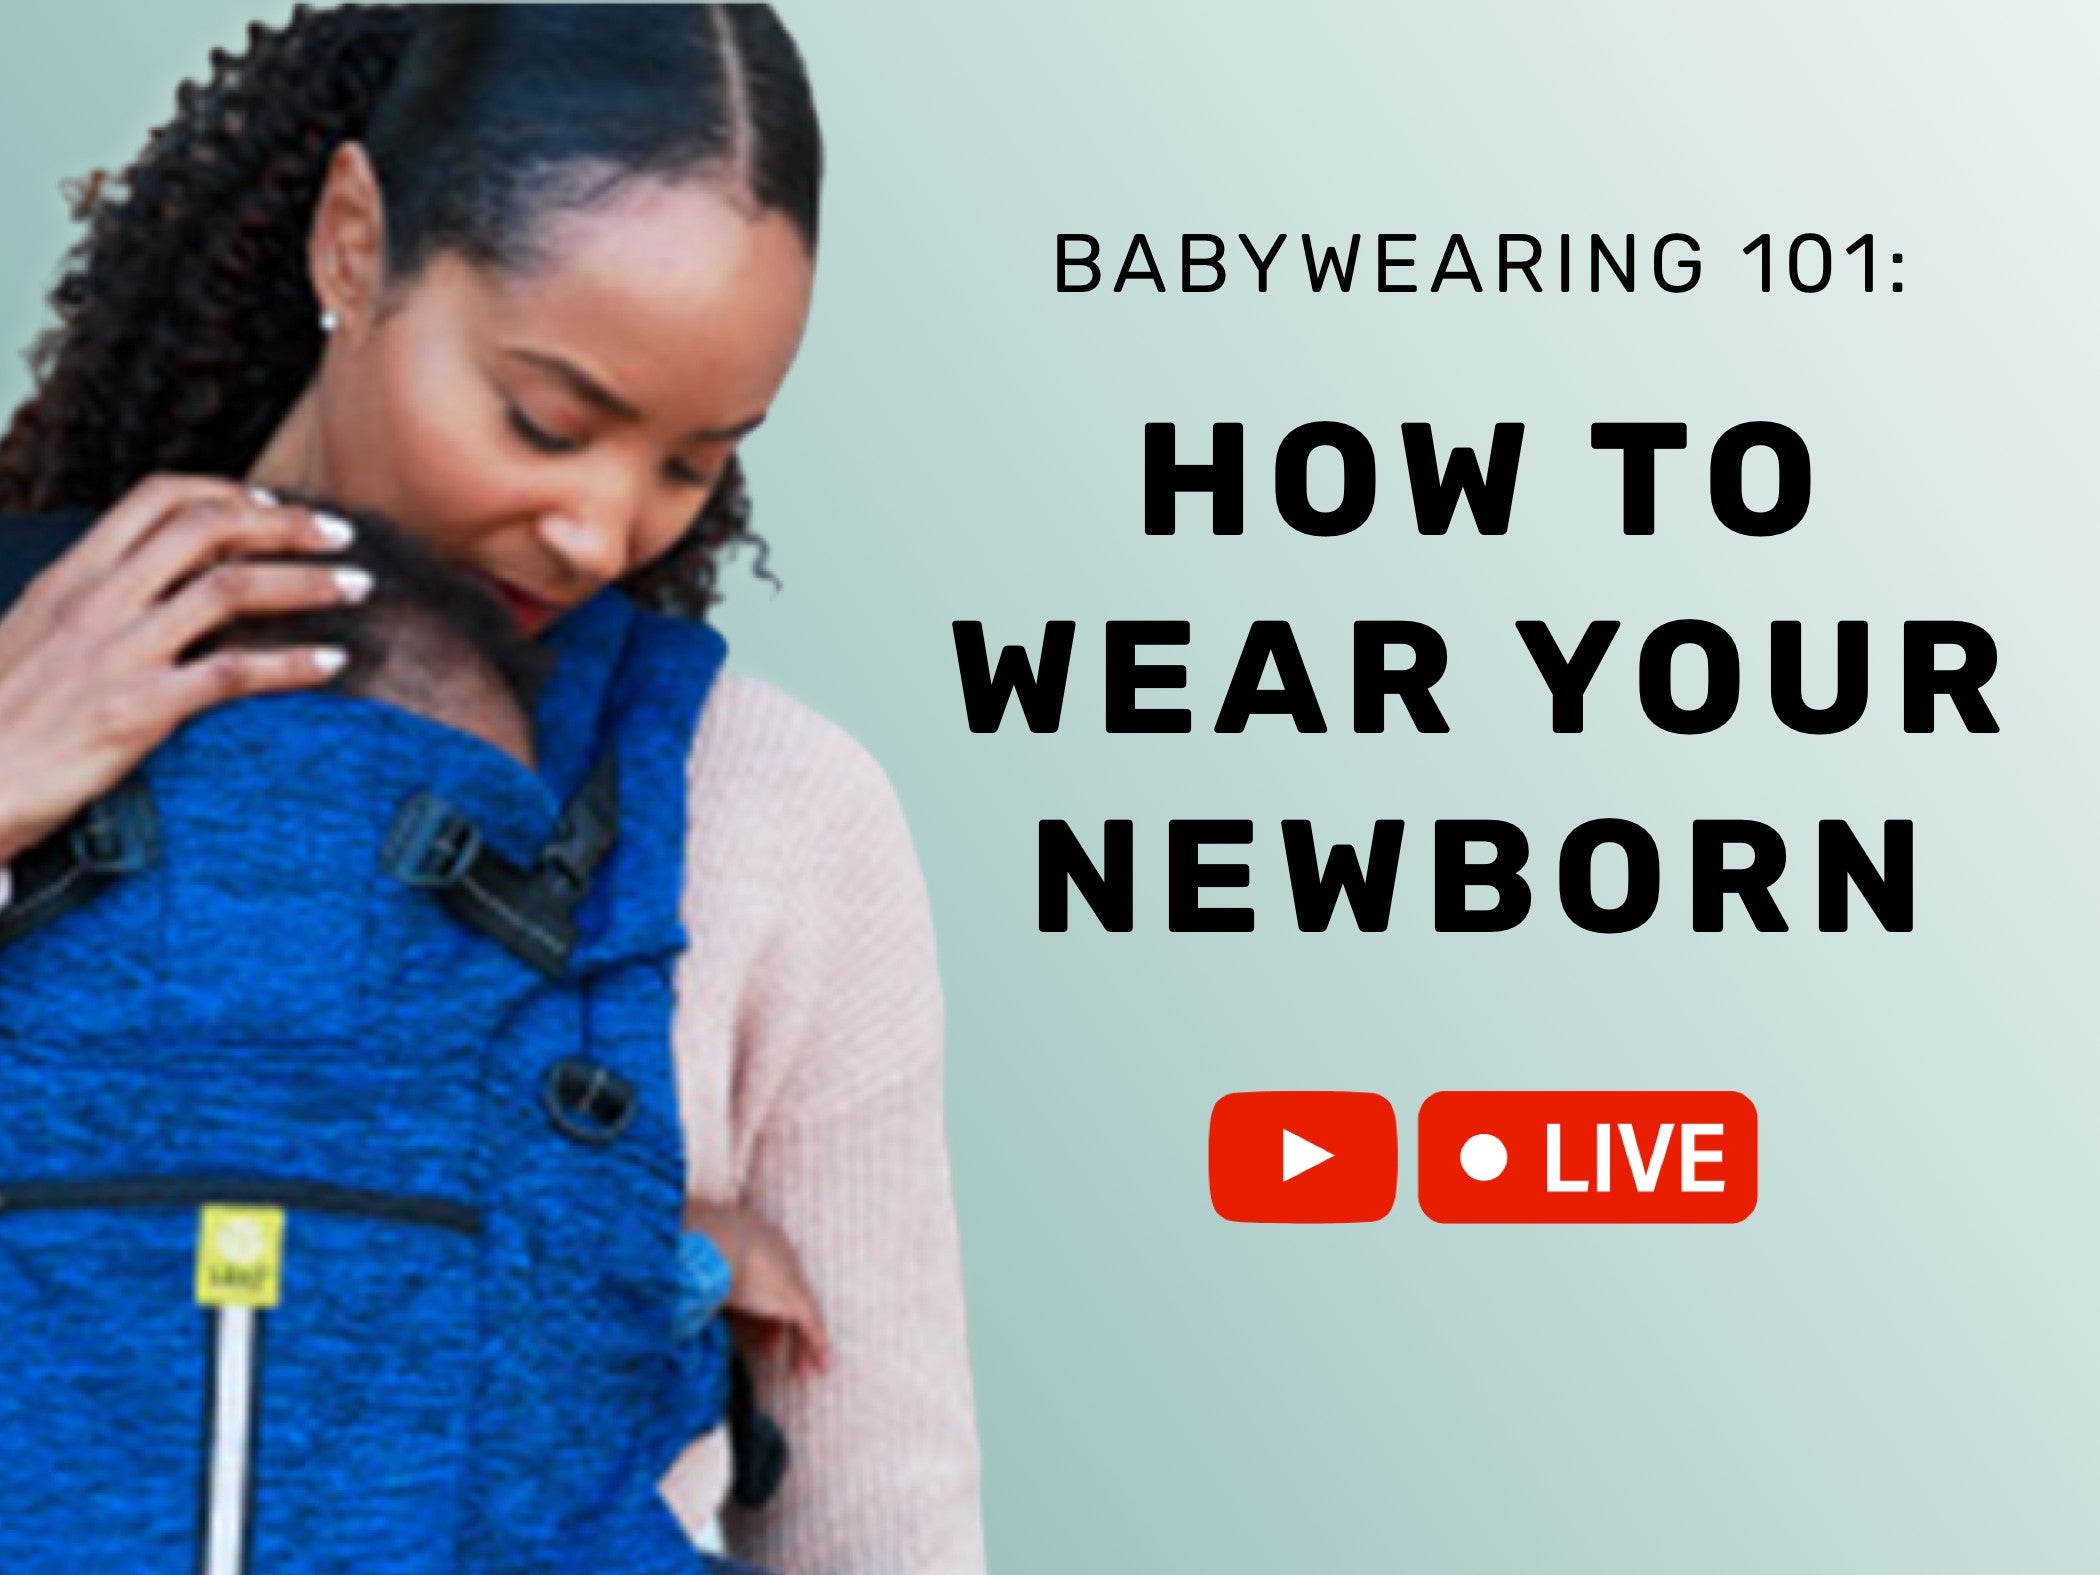 Text: Babywearing 101: How to Wear Your Newborn, YouTube Live Icon